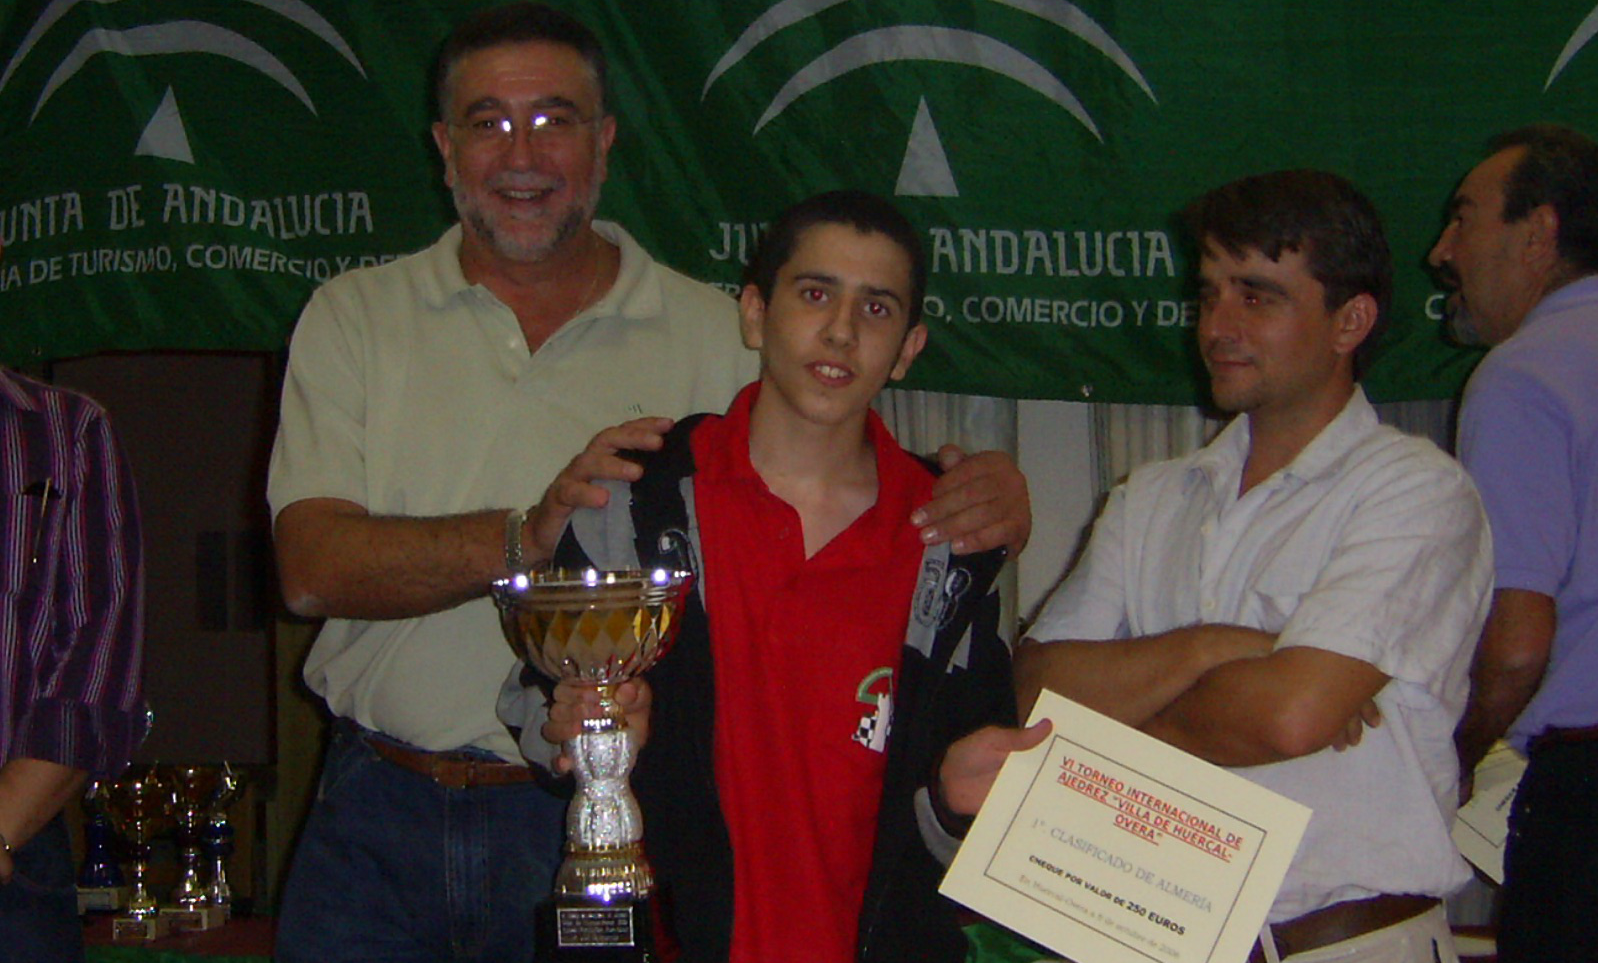 Provincial champion in the Int. Huercal-Overa 2006.